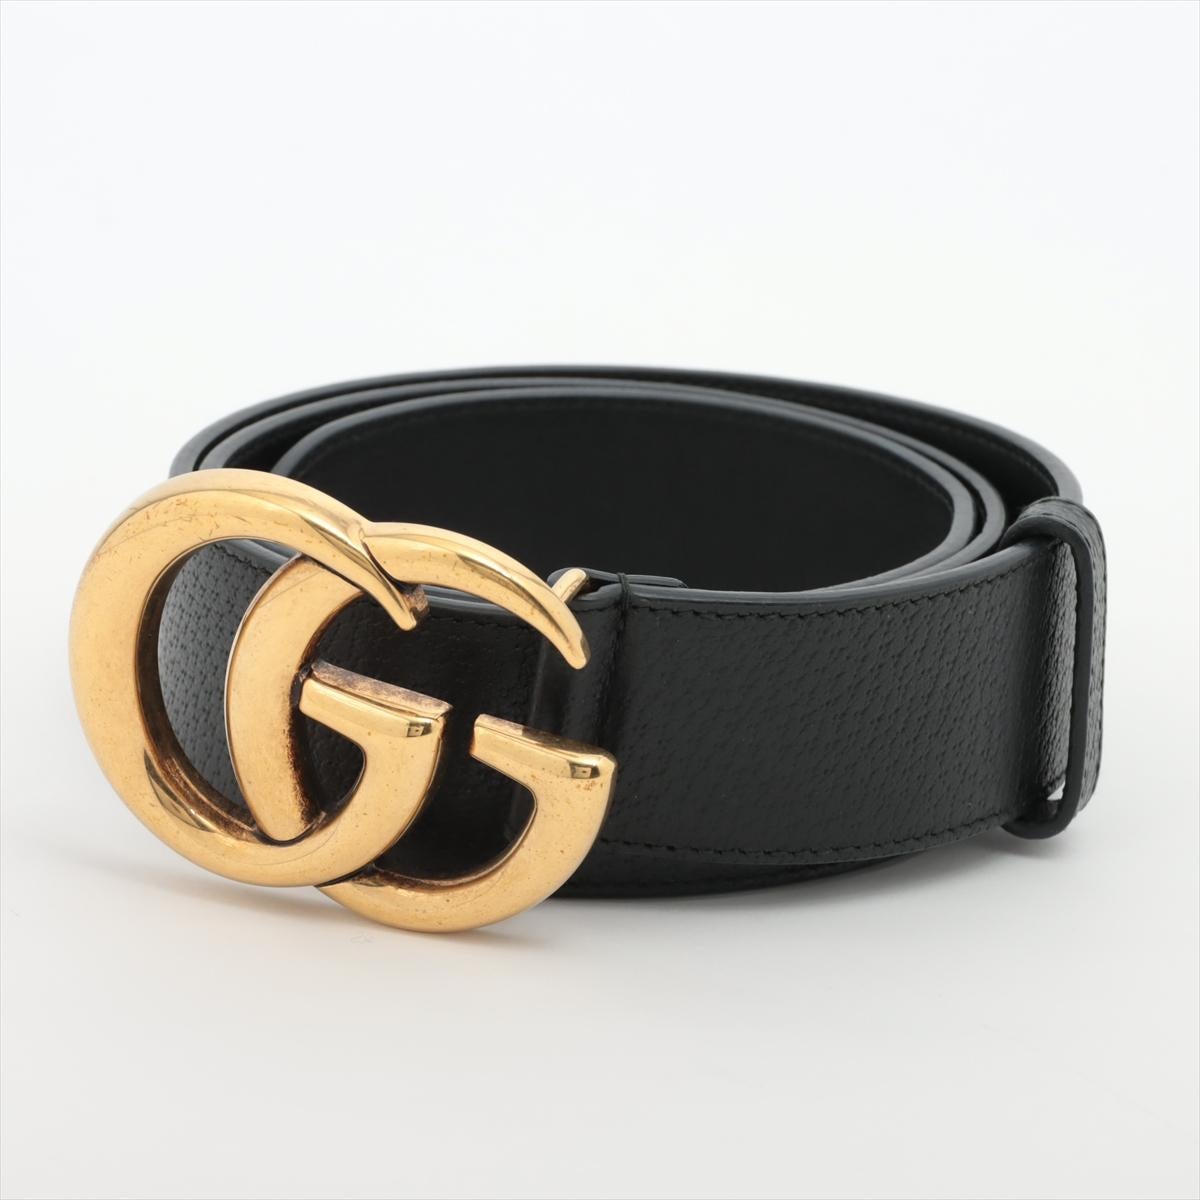 The Gucci GG Marmont Belt in Black is a sleek and sophisticated accessory that effortlessly combines style and versatility. Crafted from smooth leather, the belt features an iconic GG Marmont logo buckle in an antique gold-tone finish, adding a